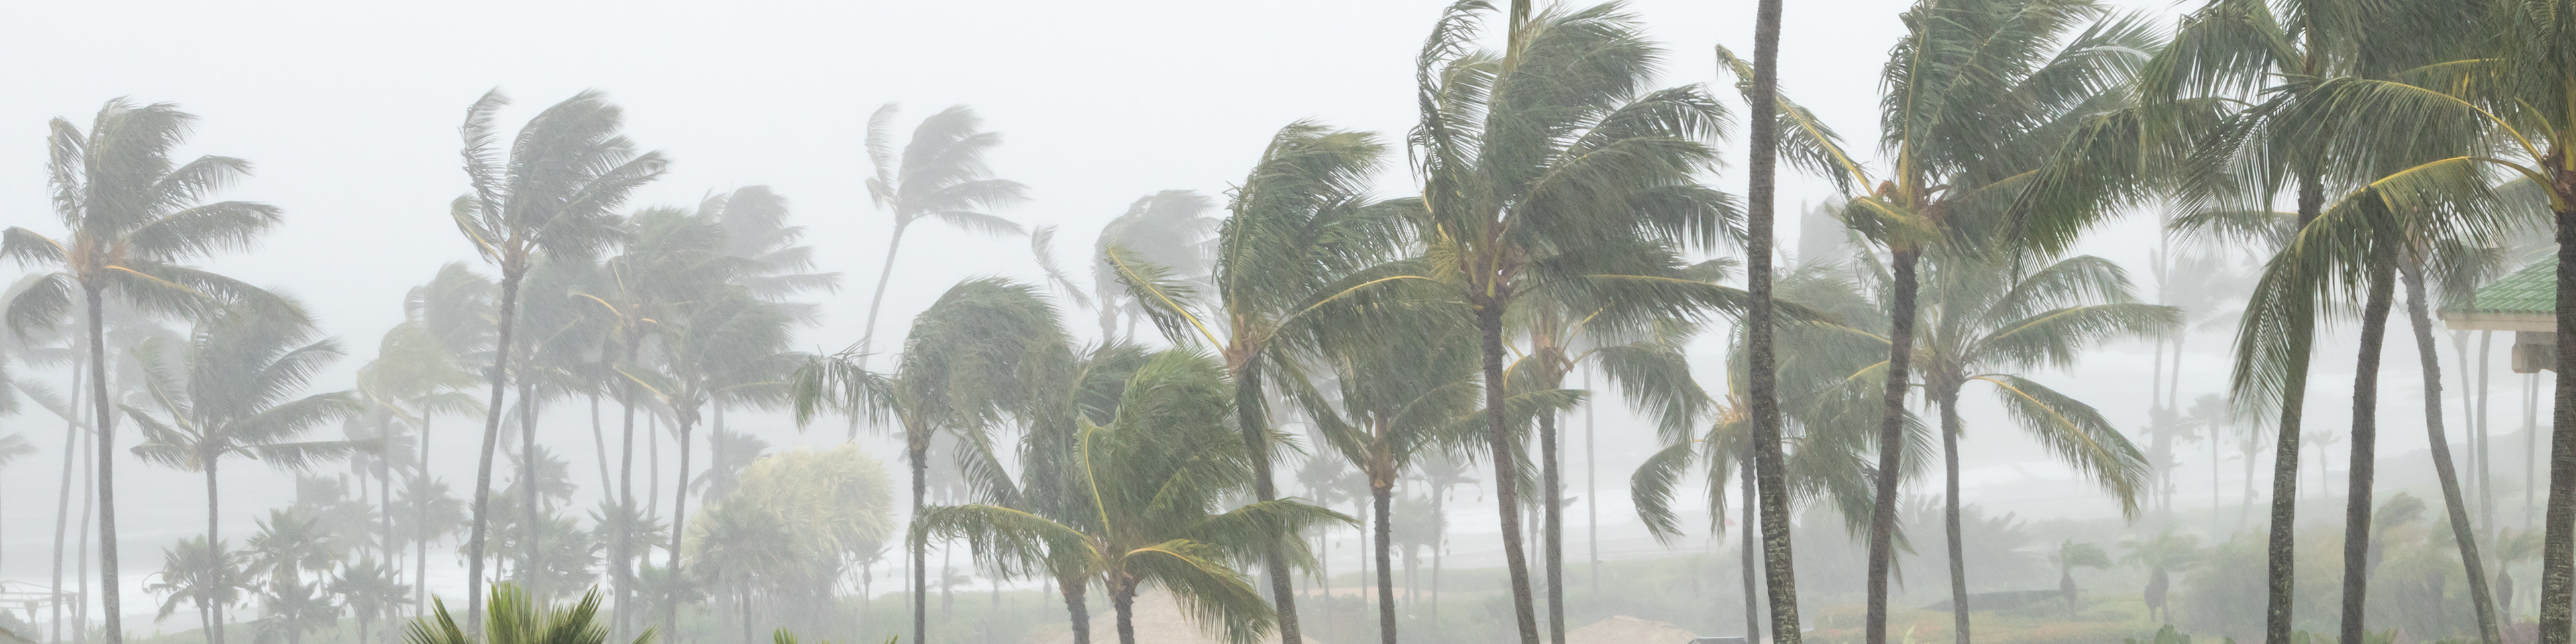 Tax relief for victims of Hurricane Fiona in Puerto Rico: IRA and HSA deadlines postponed